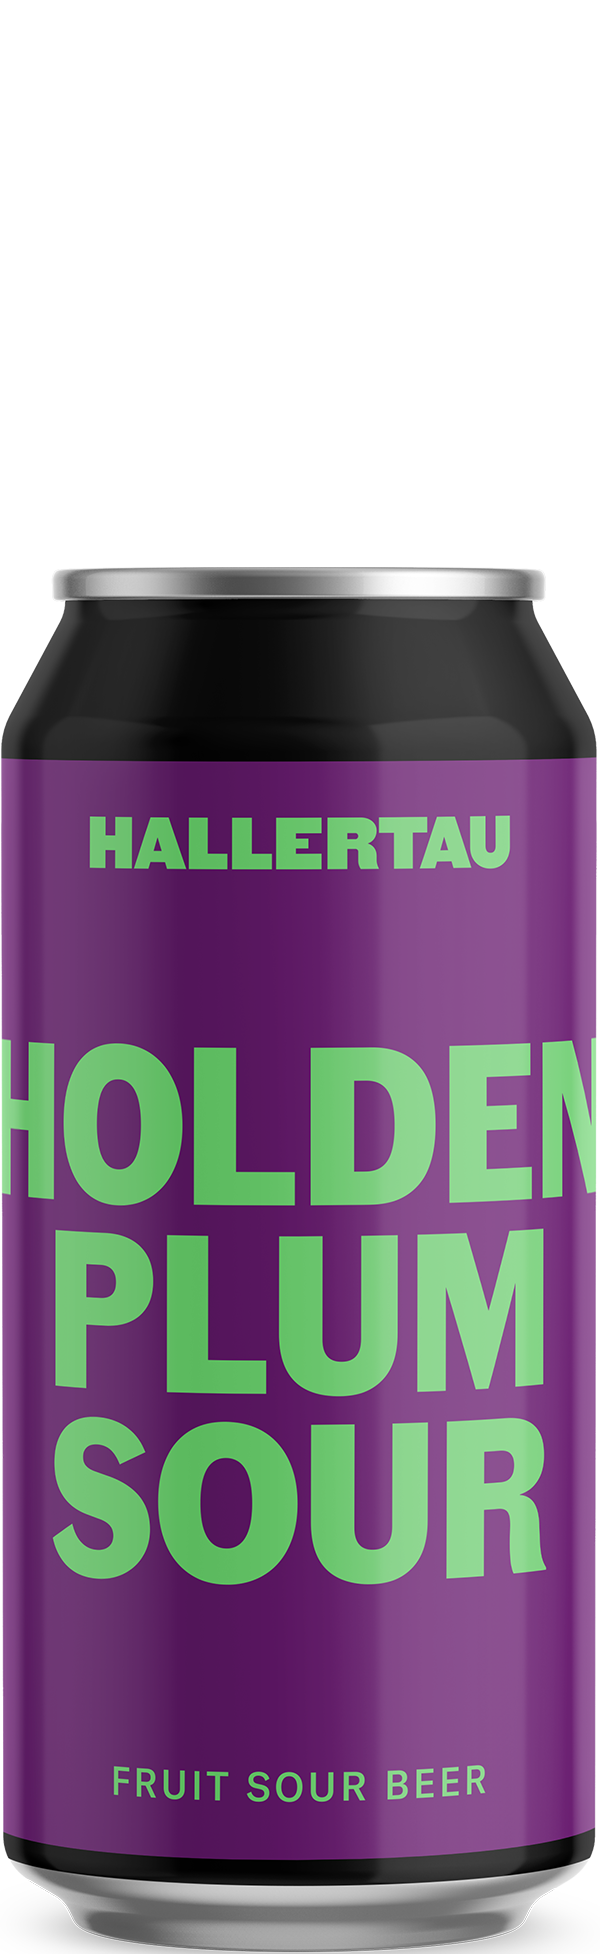 HOLDEN PLUM SOUR 440ML CANS